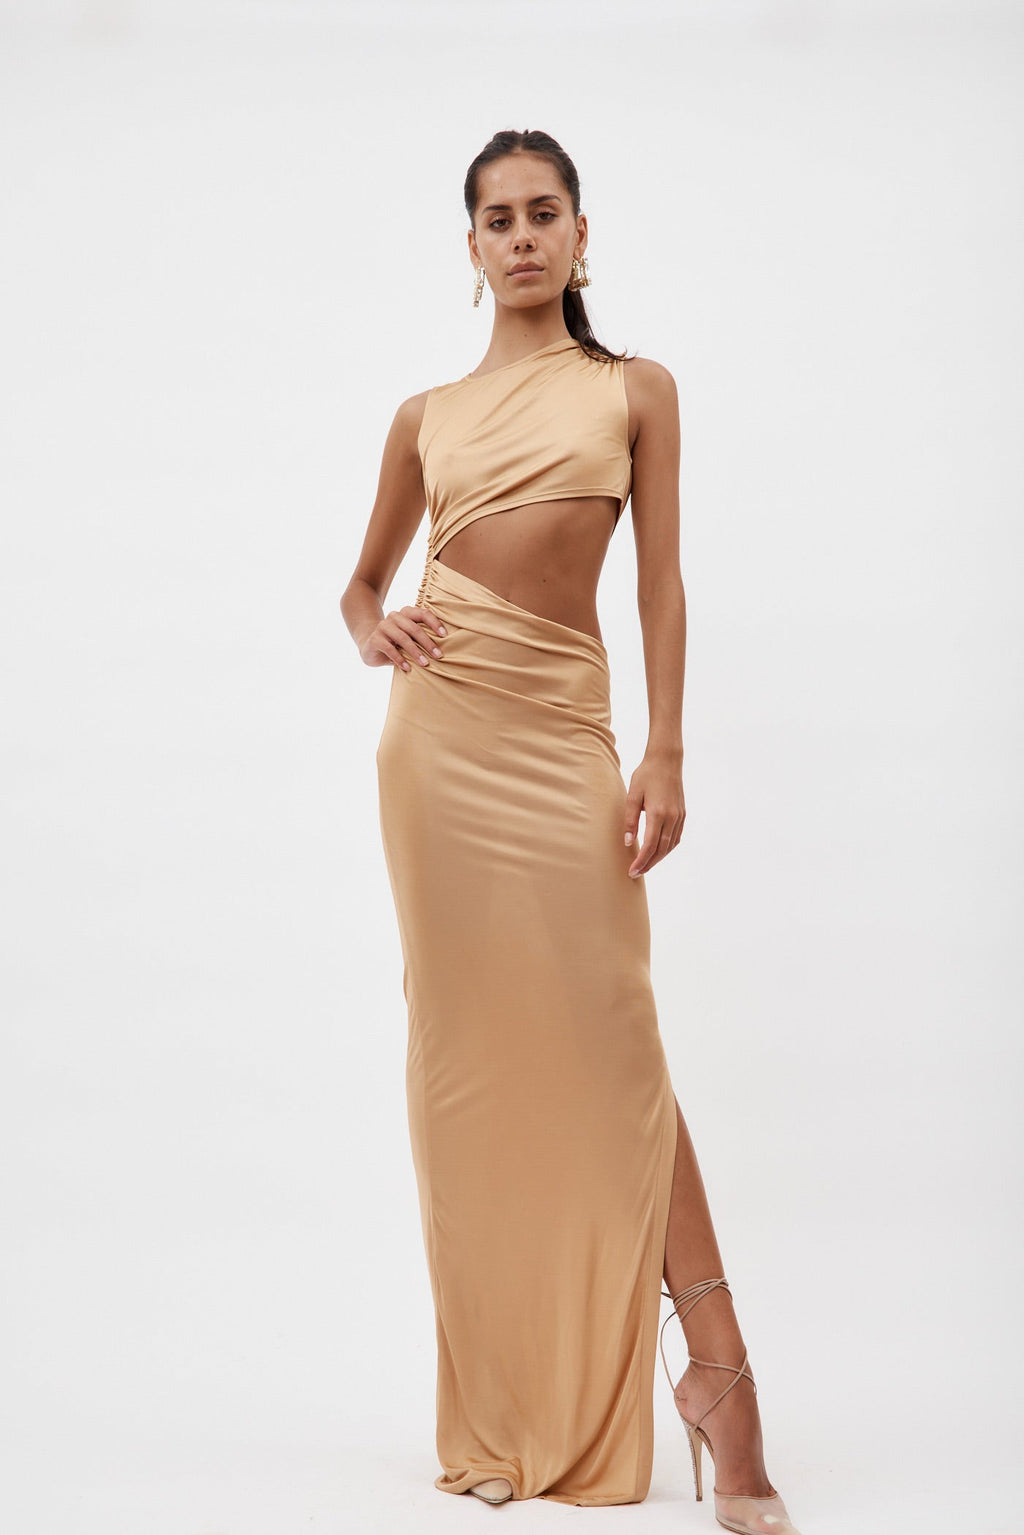 Long Shimmer Prom Dress with Side Cut Outs - PromGirl